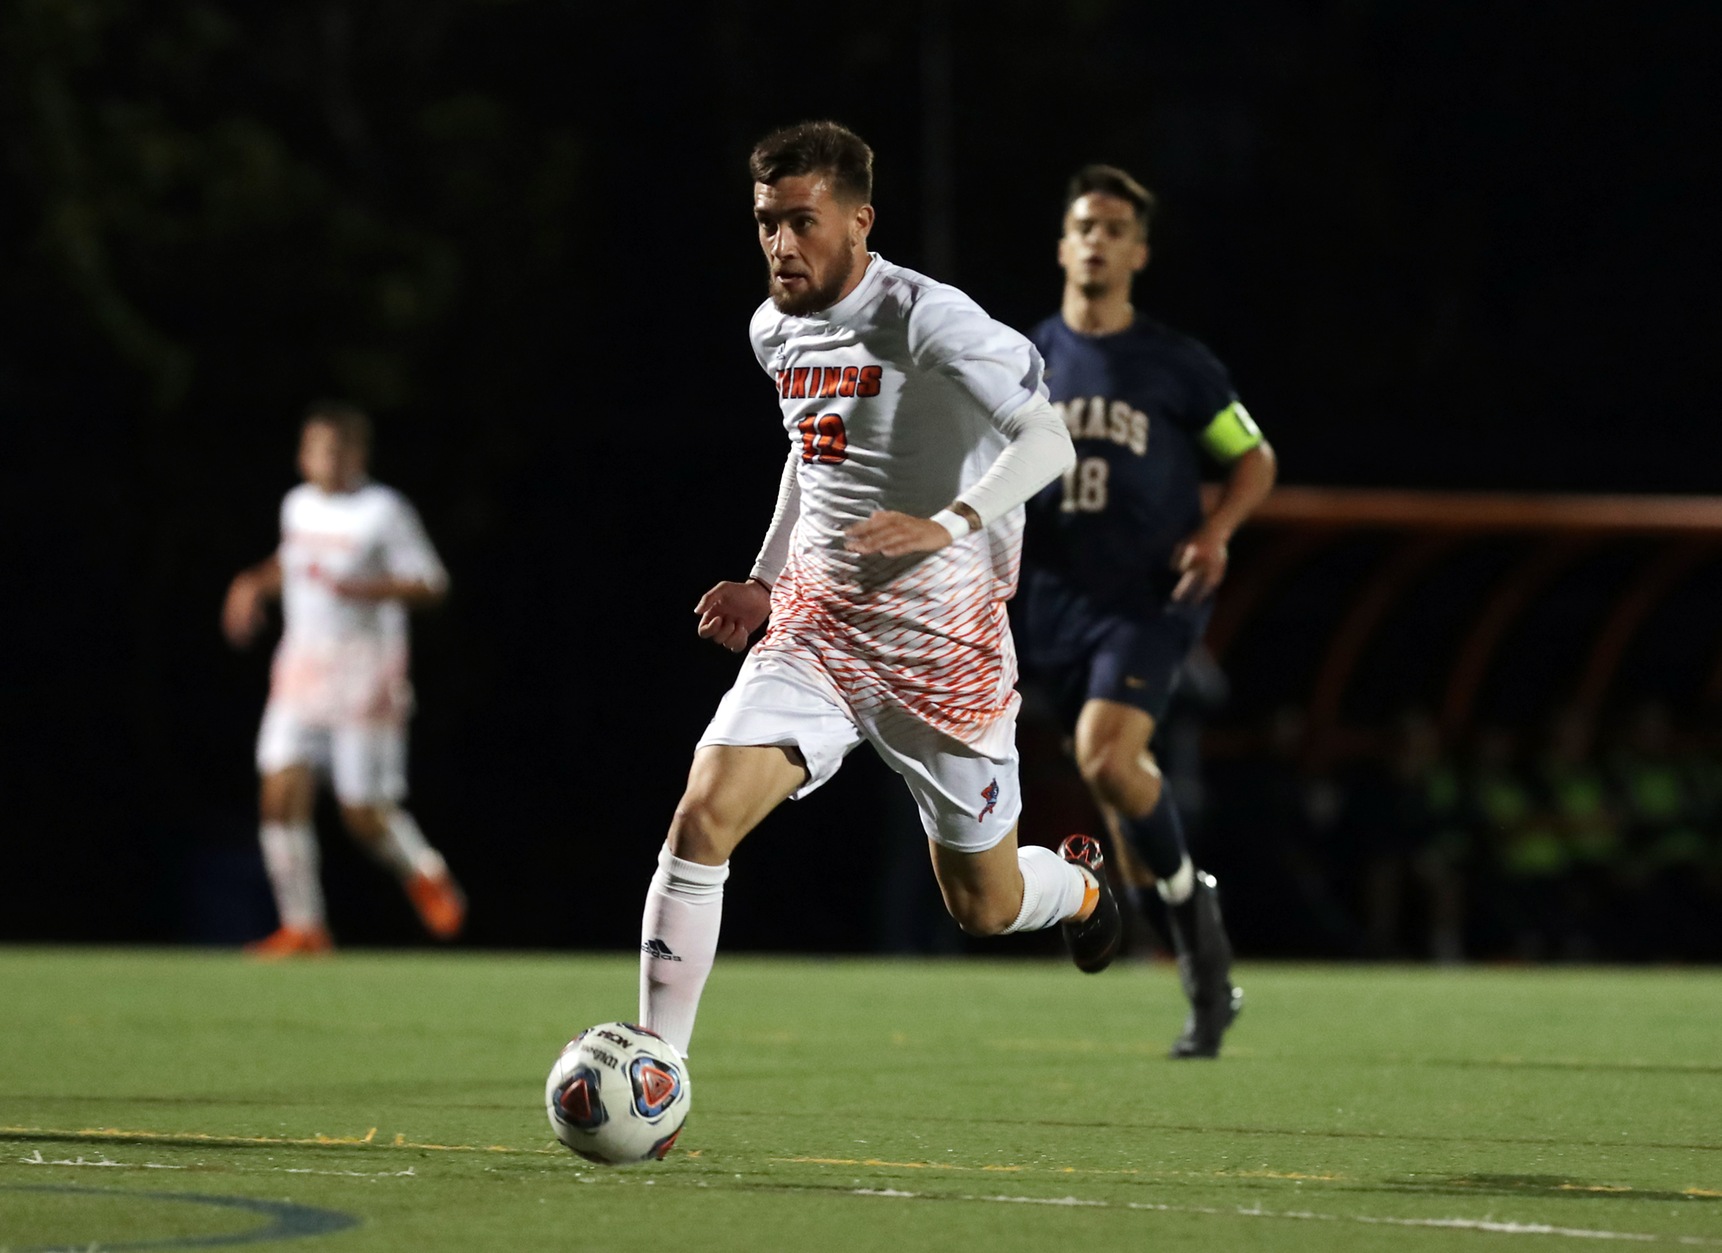 #2 Bridgewater State Gets Past #3 Salem State in MASCAC Semifinal Shootout